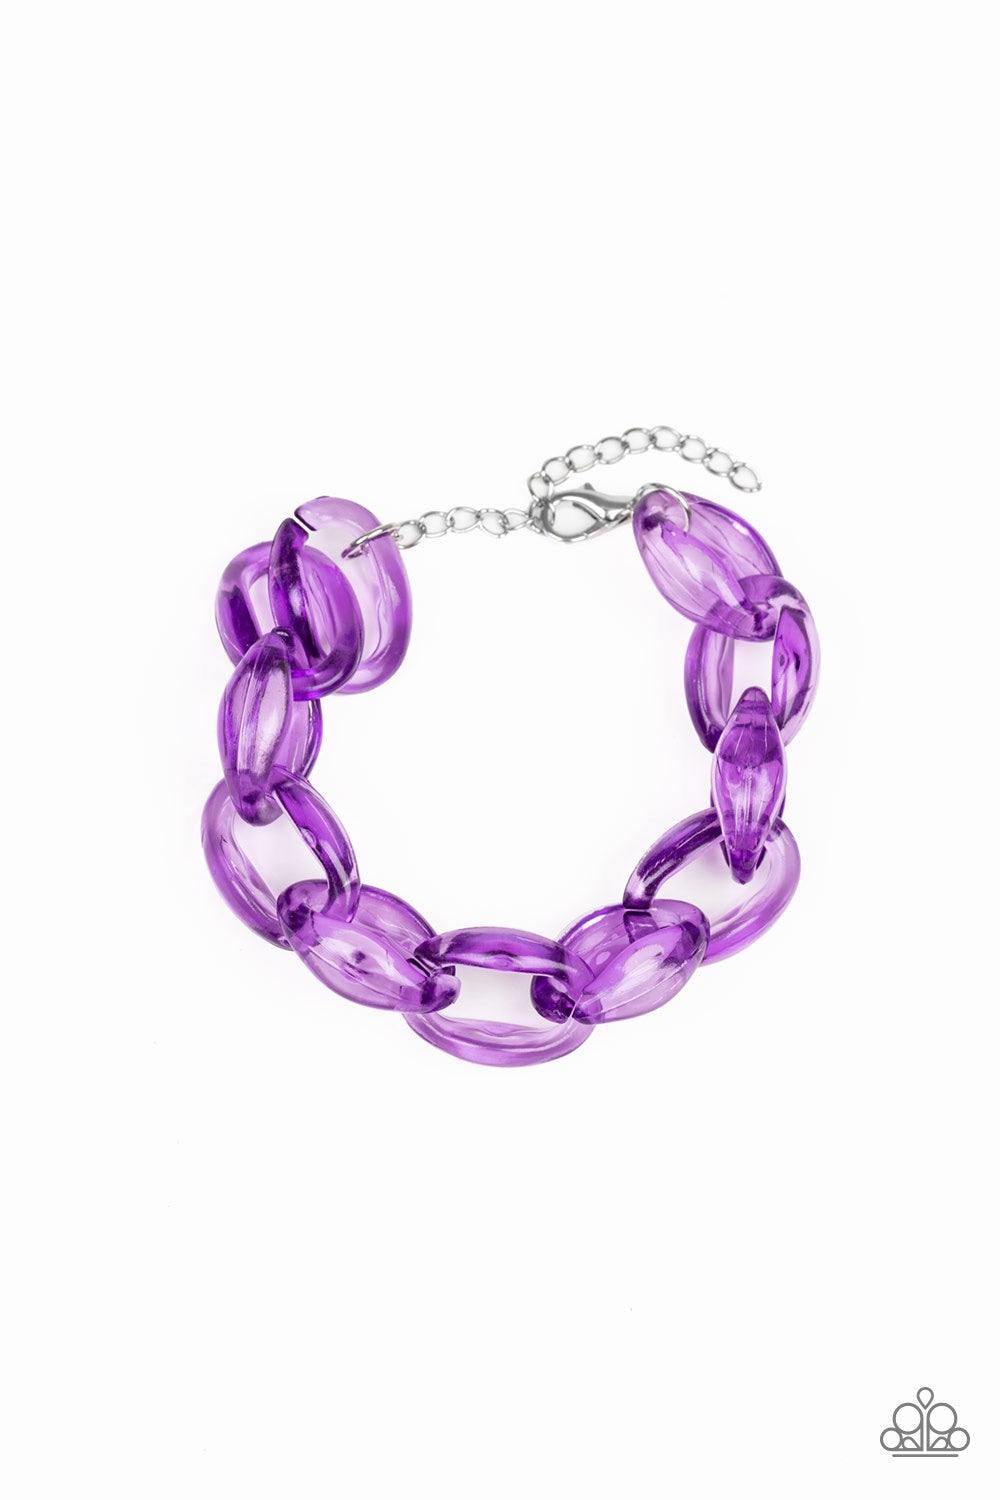 Paparazzi Accessories Ice Ice Baby - Purple Glassy purple links connect around the wrist, creating a colorfully, modern chain. Features an adjustable clasp closure. Jewelry